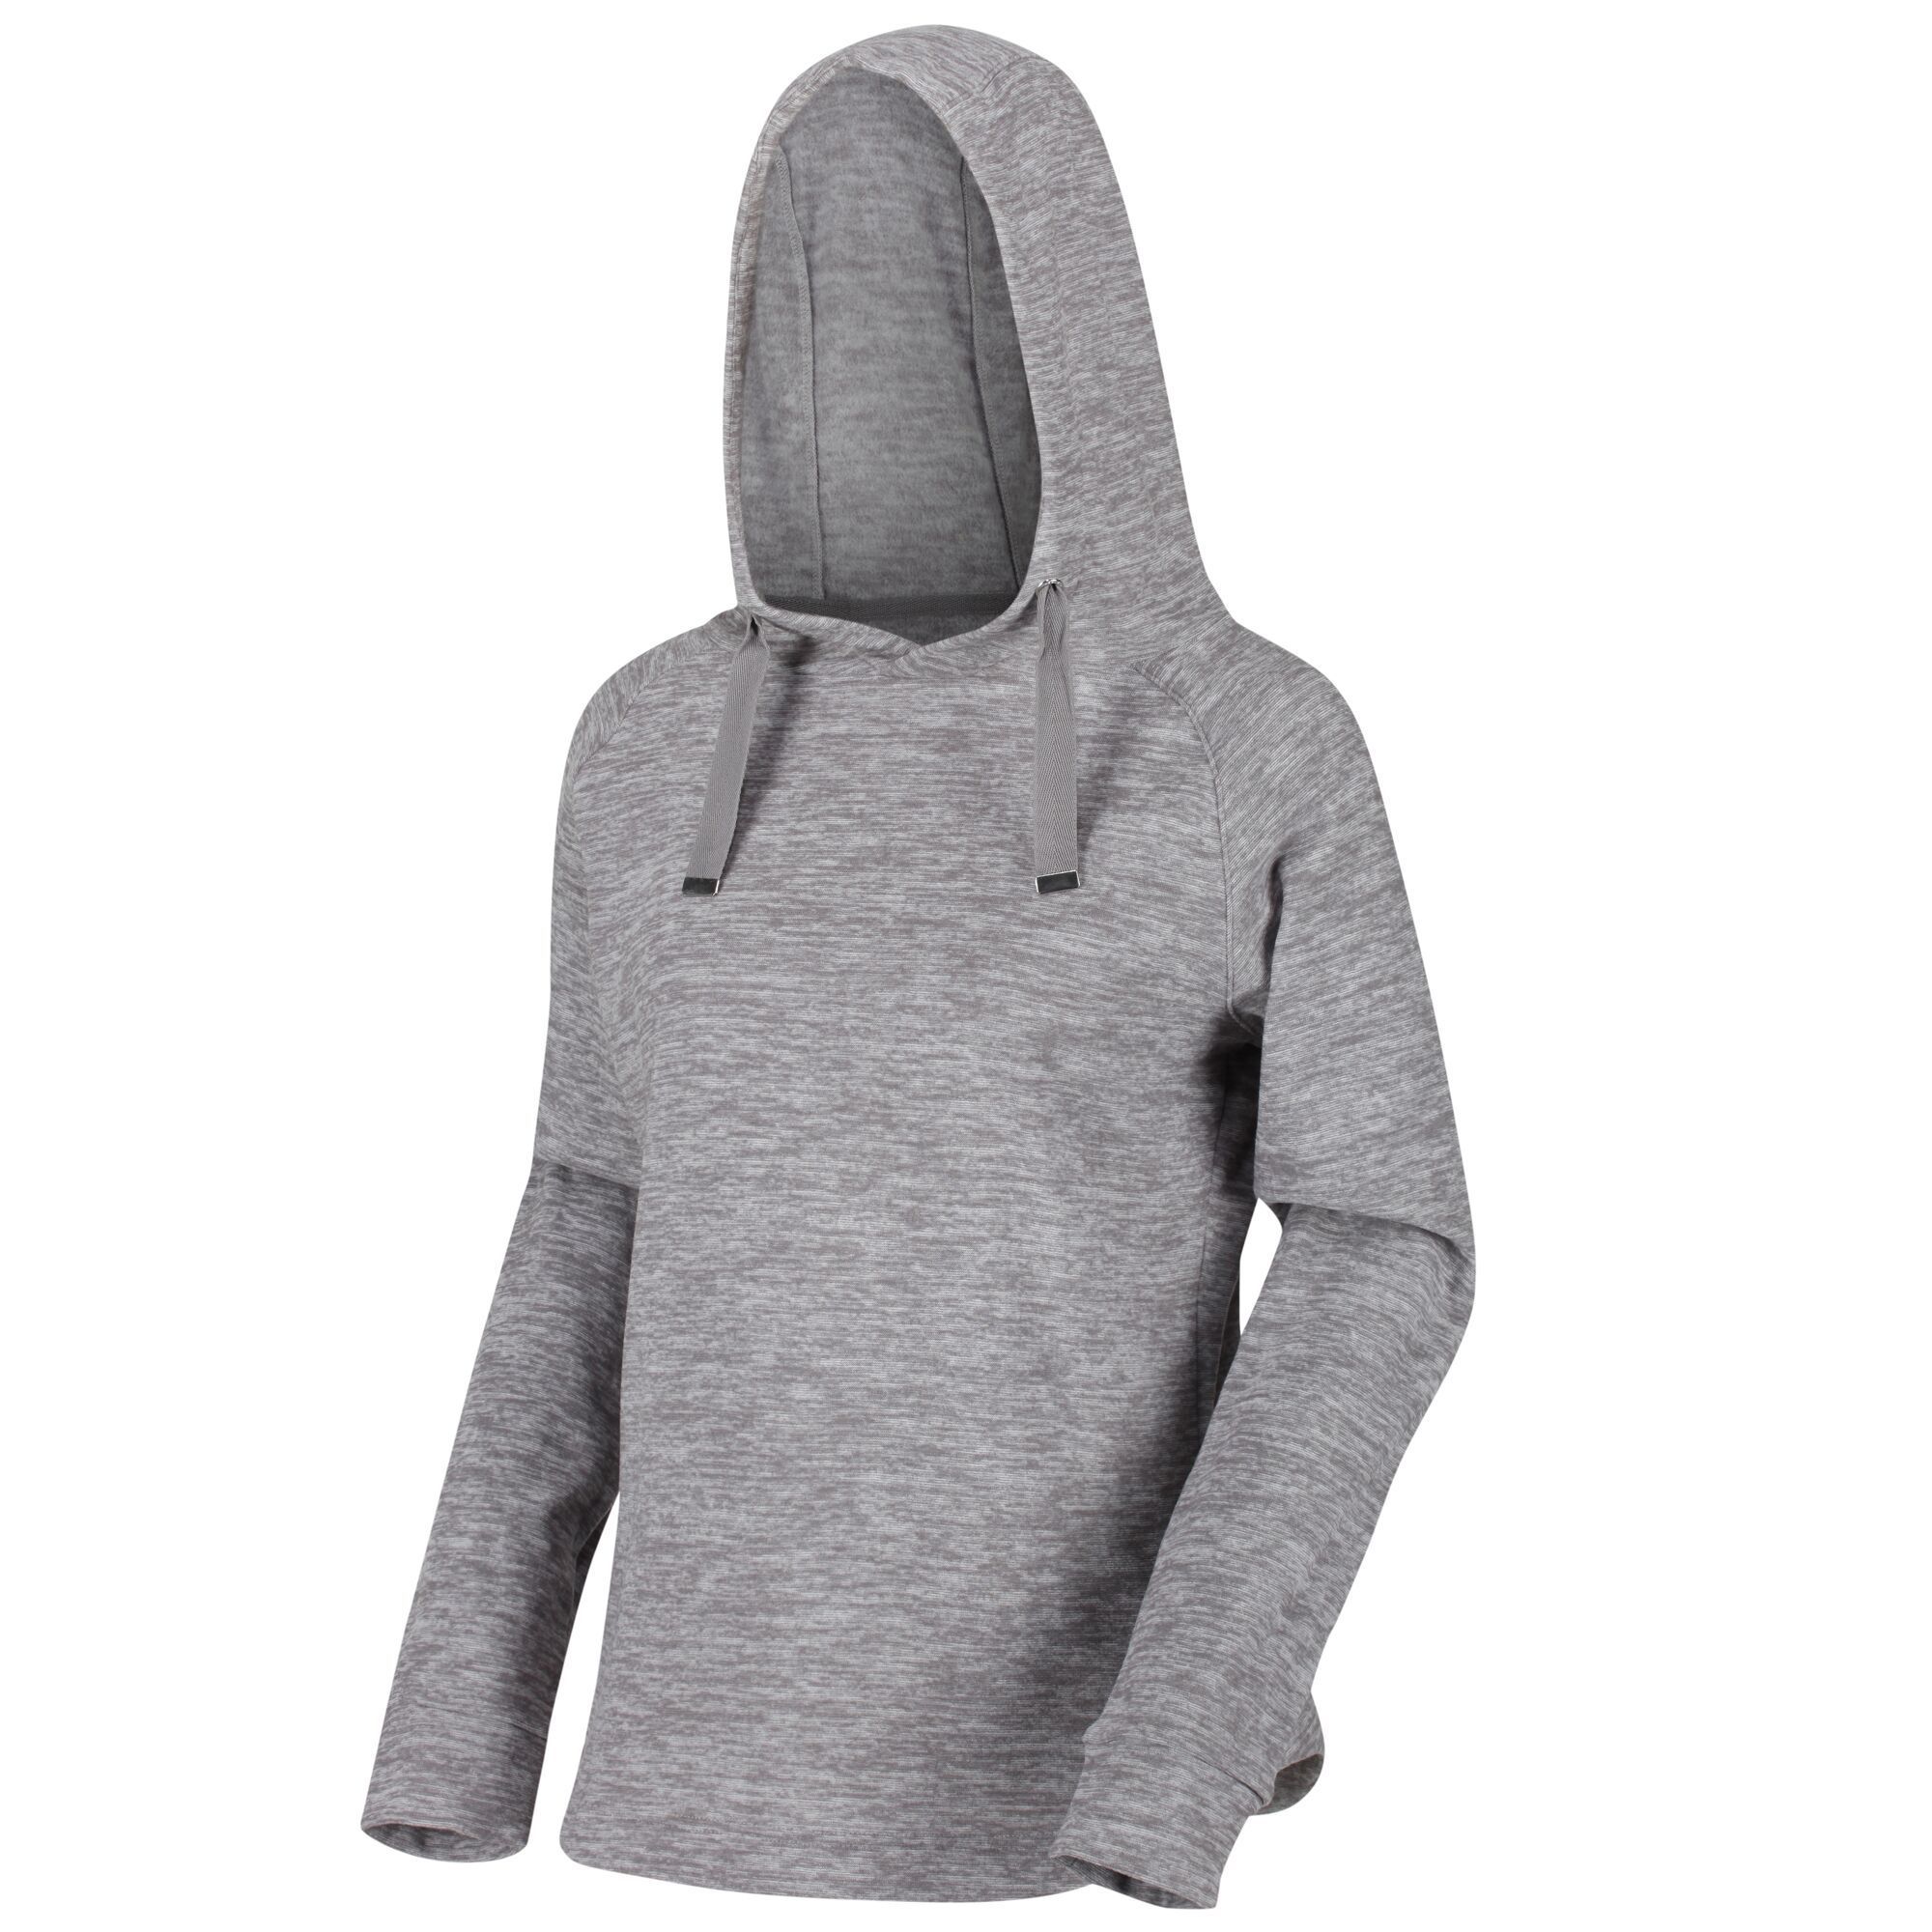 100% Polyester marl fabric. Curly embossed fleece fabric. Grown on hood with drawcord adjusters. Shaped hem. Size/Bust (ins) (8-32in), (10-34in), (12-36in), (14-38in), (16-40in), (18-42in), (20-44in).